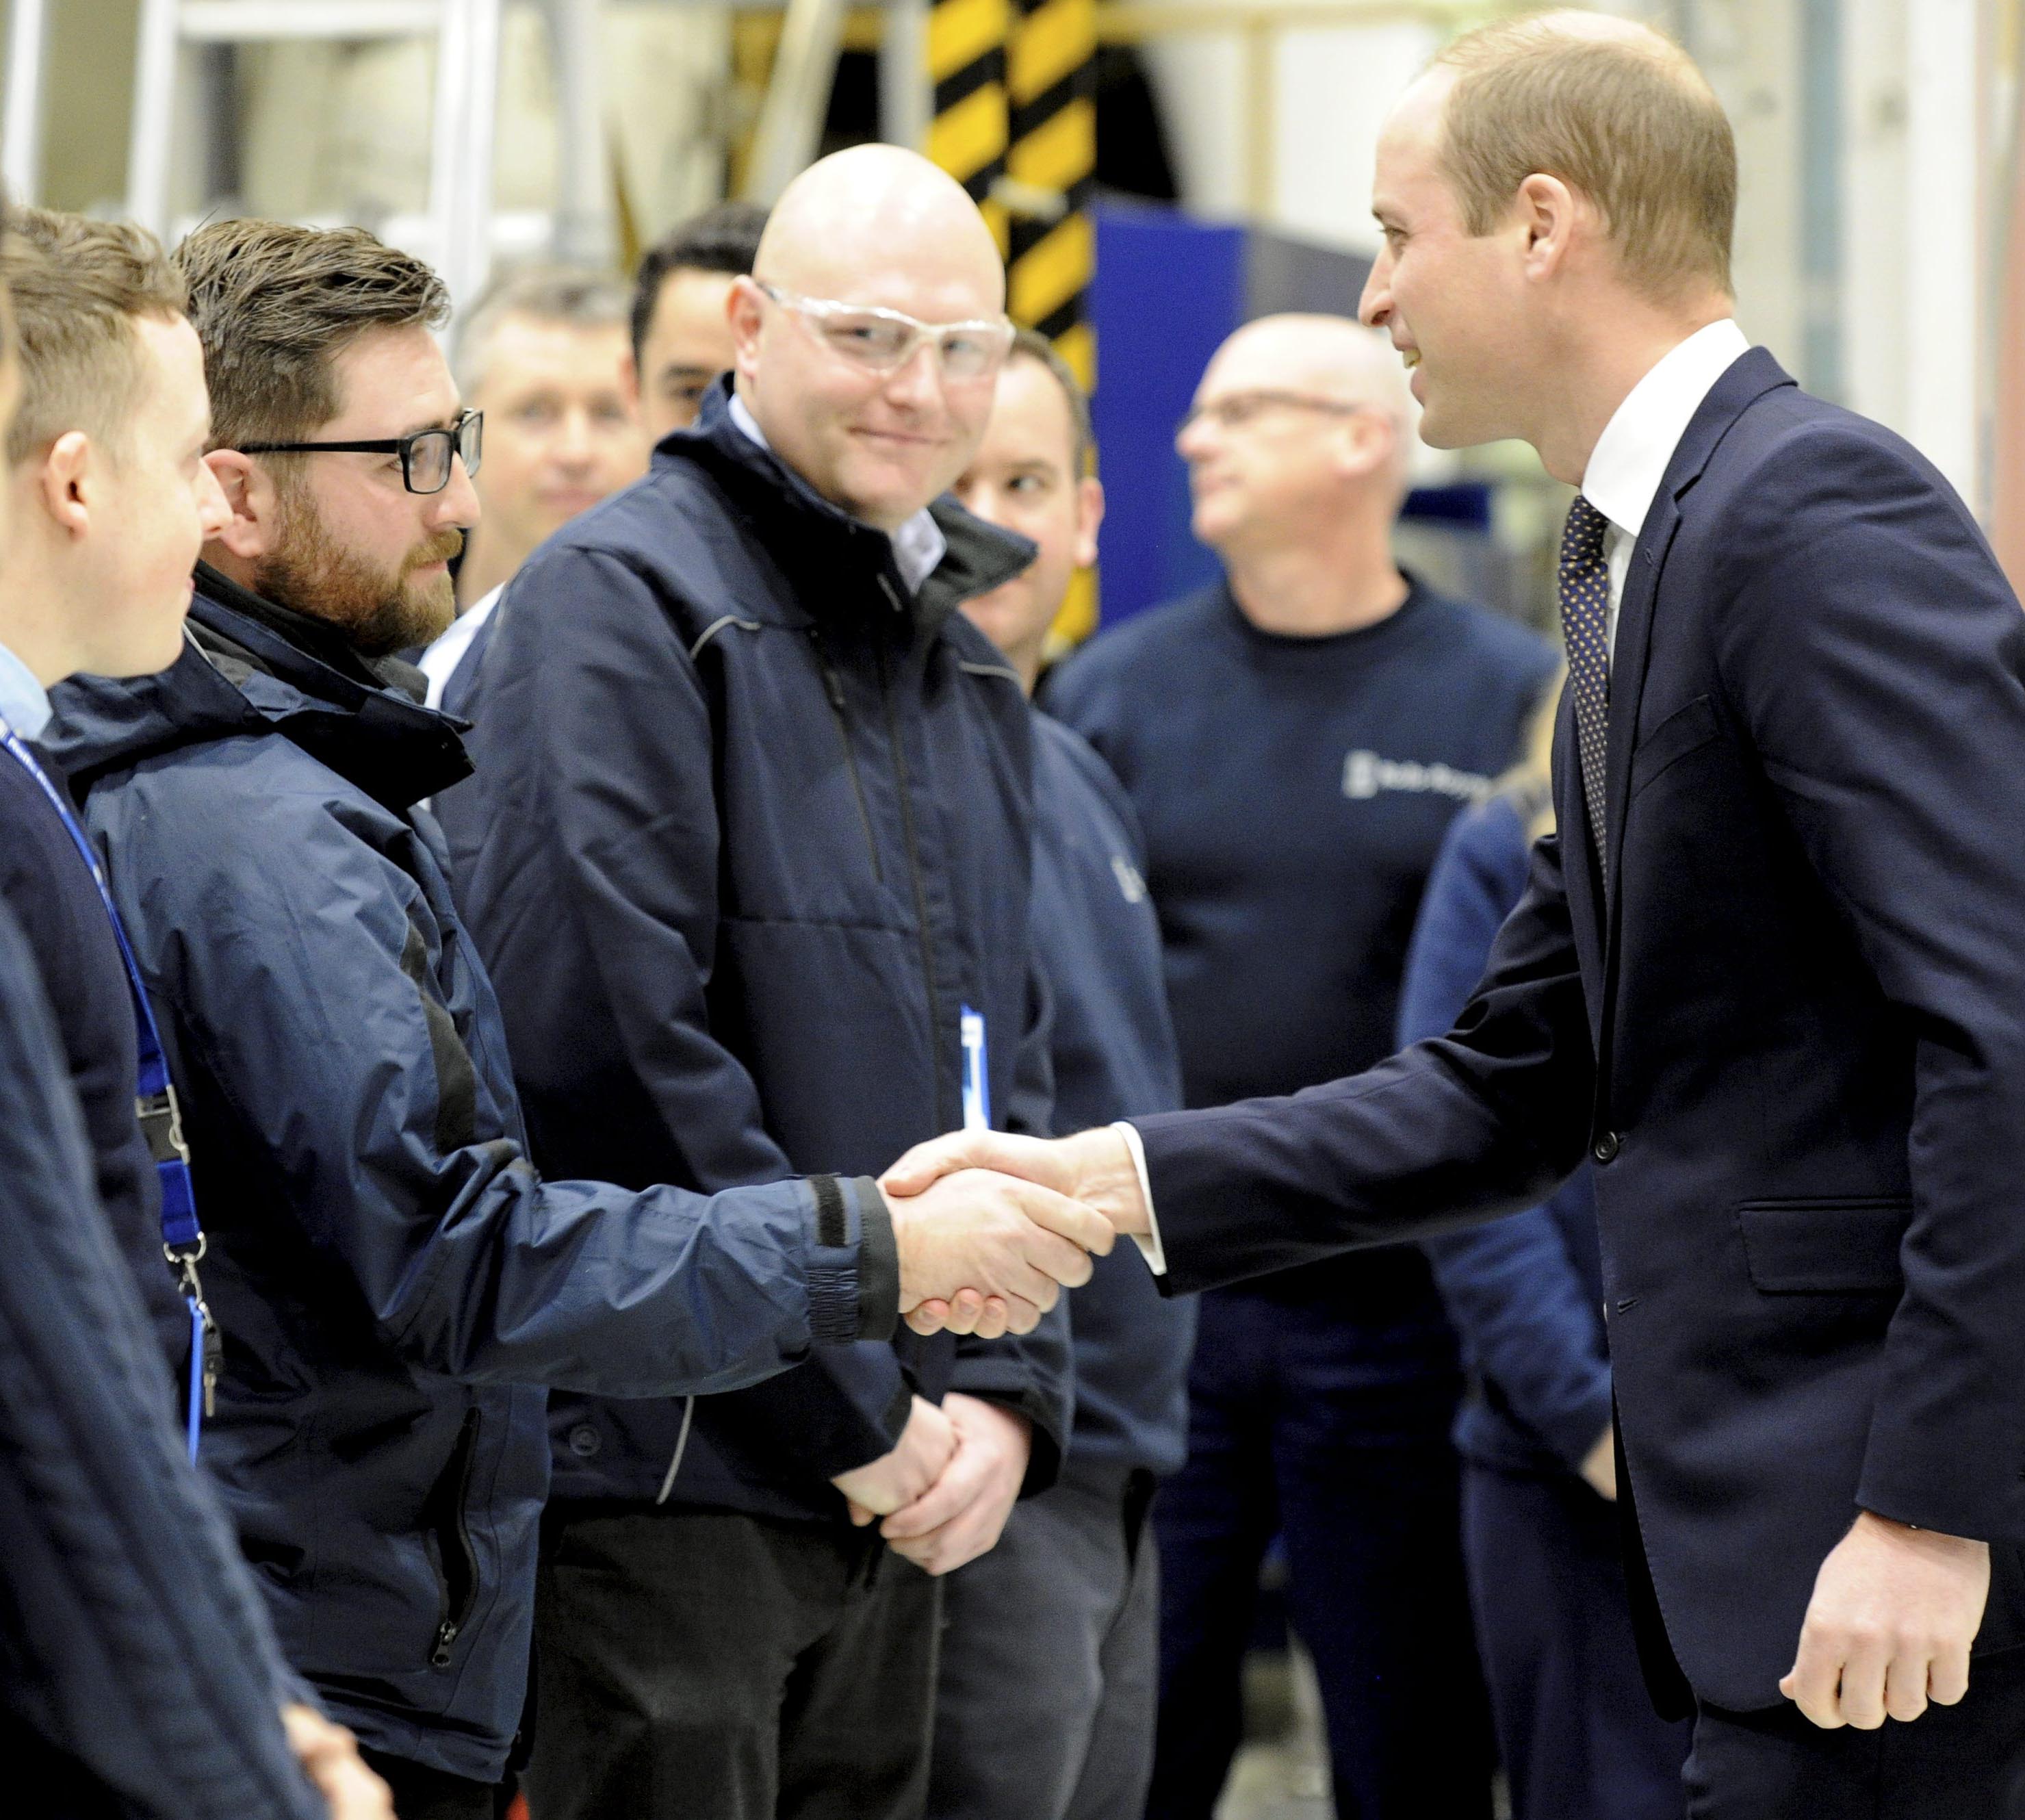 Picture: Victoria Wilcox
ROYAL ROTA ARRANGEMENT SO PICTURES ARE AVAILABLE TO MEDIA

The Duke of Cambridge HRH Prince William visit to Rolls-Royce HQ in Wilmore Road, Derby

Employees eagerly await his arrival, then some even got to meet him in person too - at the Technology Centre here